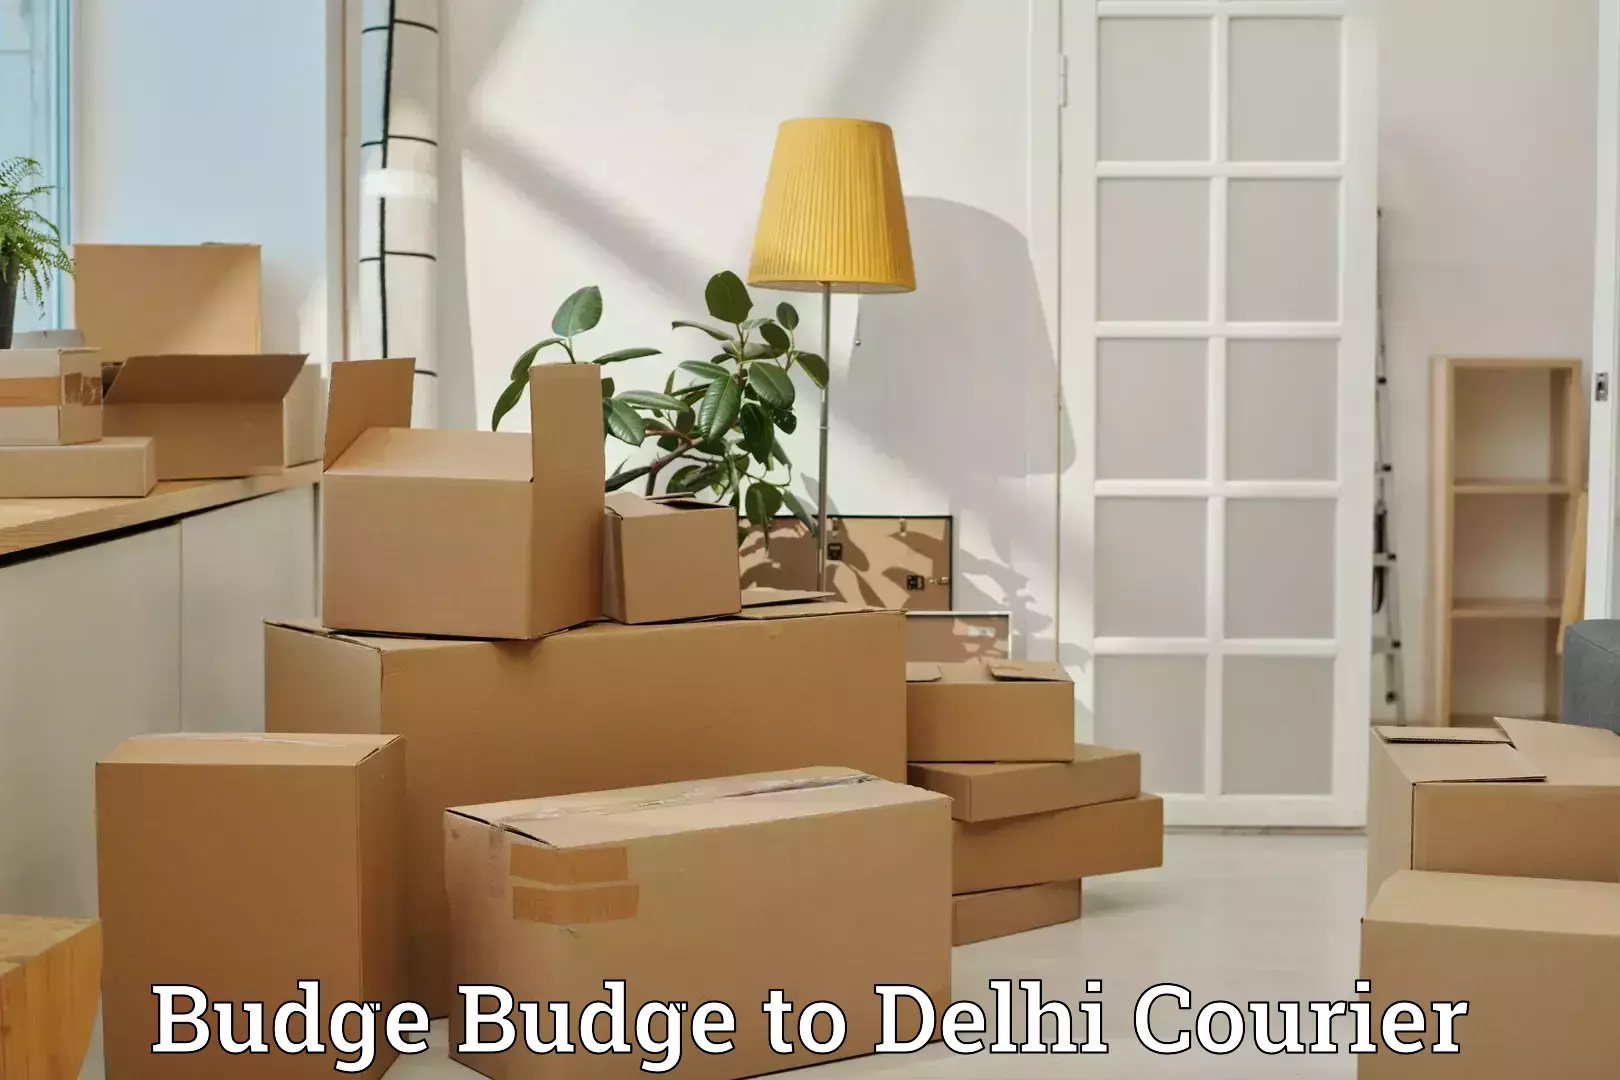 Baggage transport technology Budge Budge to Delhi